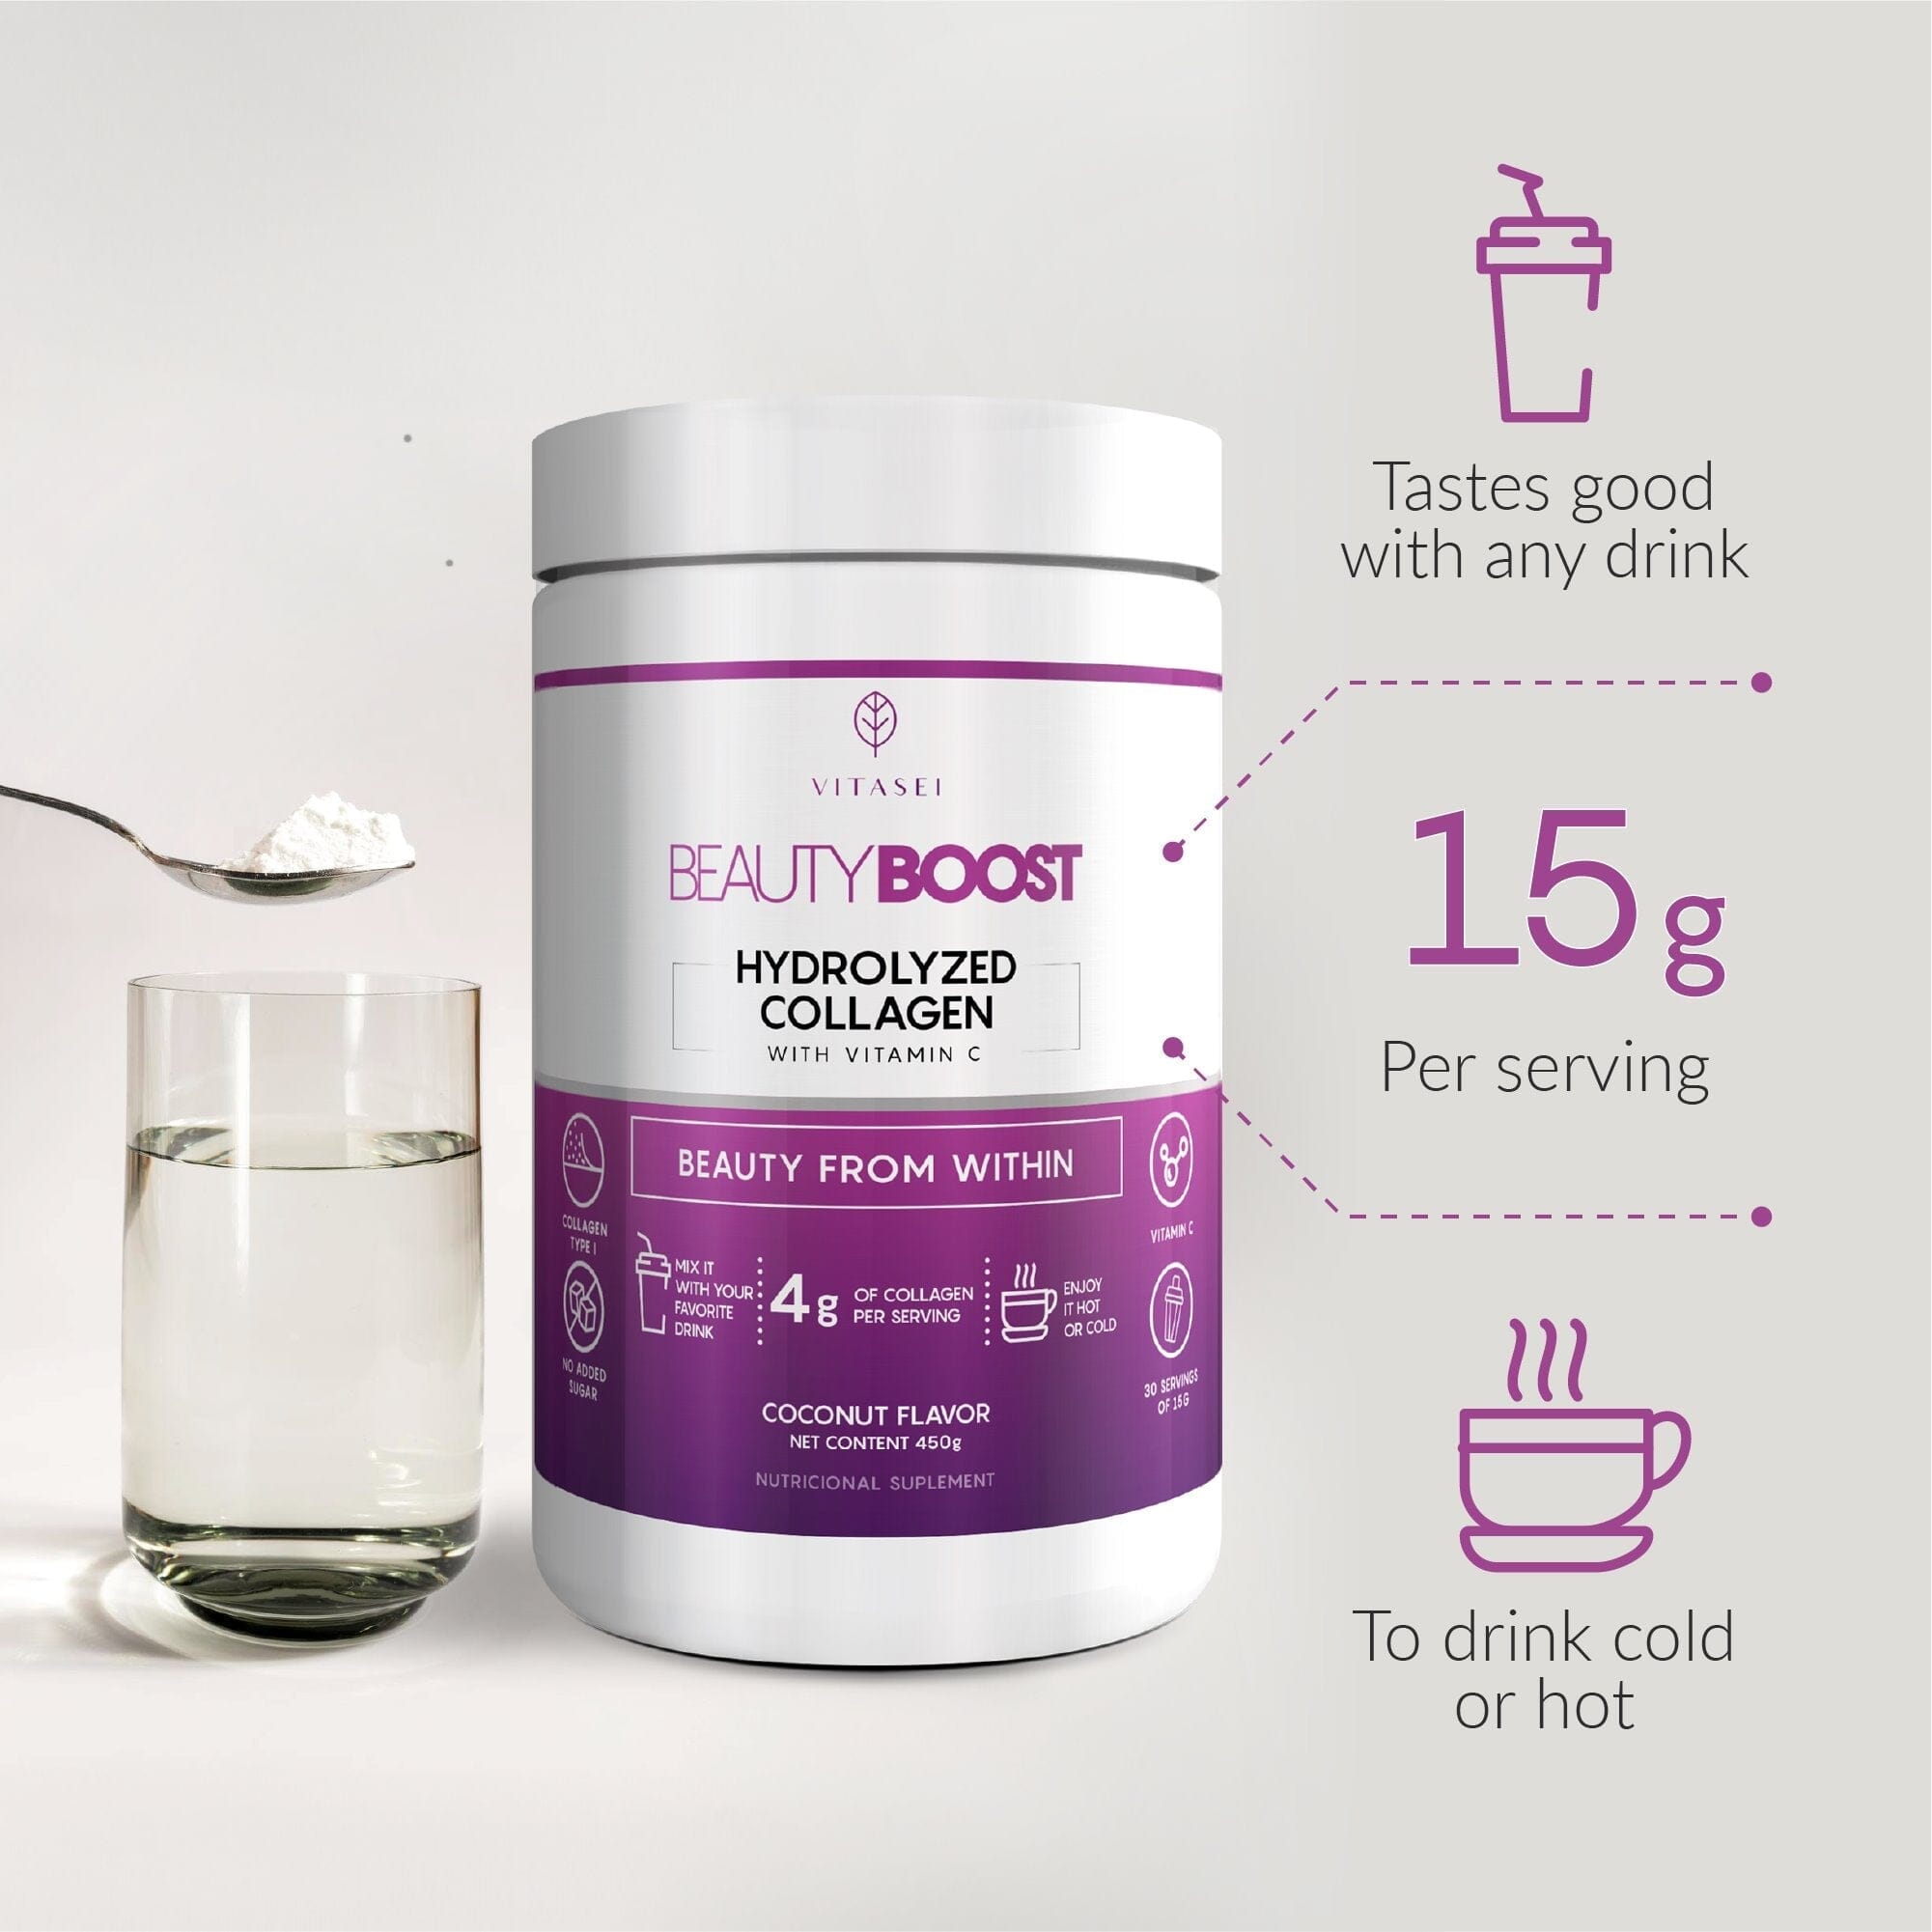 HYDROLYZED COLLAGEN + RESVERATROL COCONUT FLAVOR AND UNFLAVORED KIT